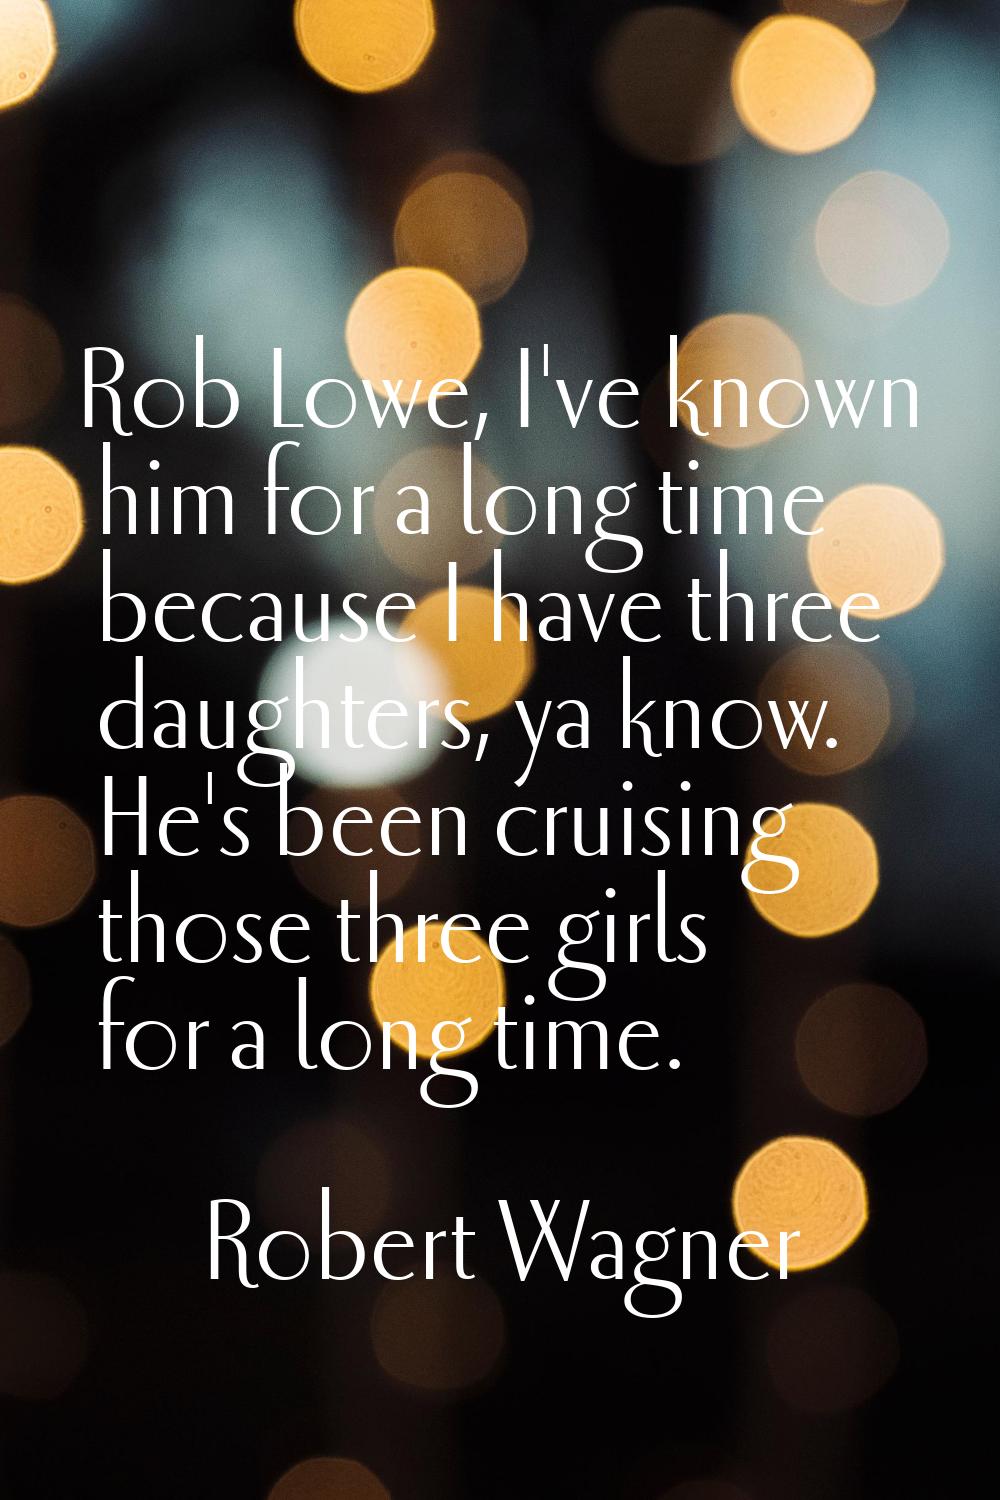 Rob Lowe, I've known him for a long time because I have three daughters, ya know. He's been cruisin